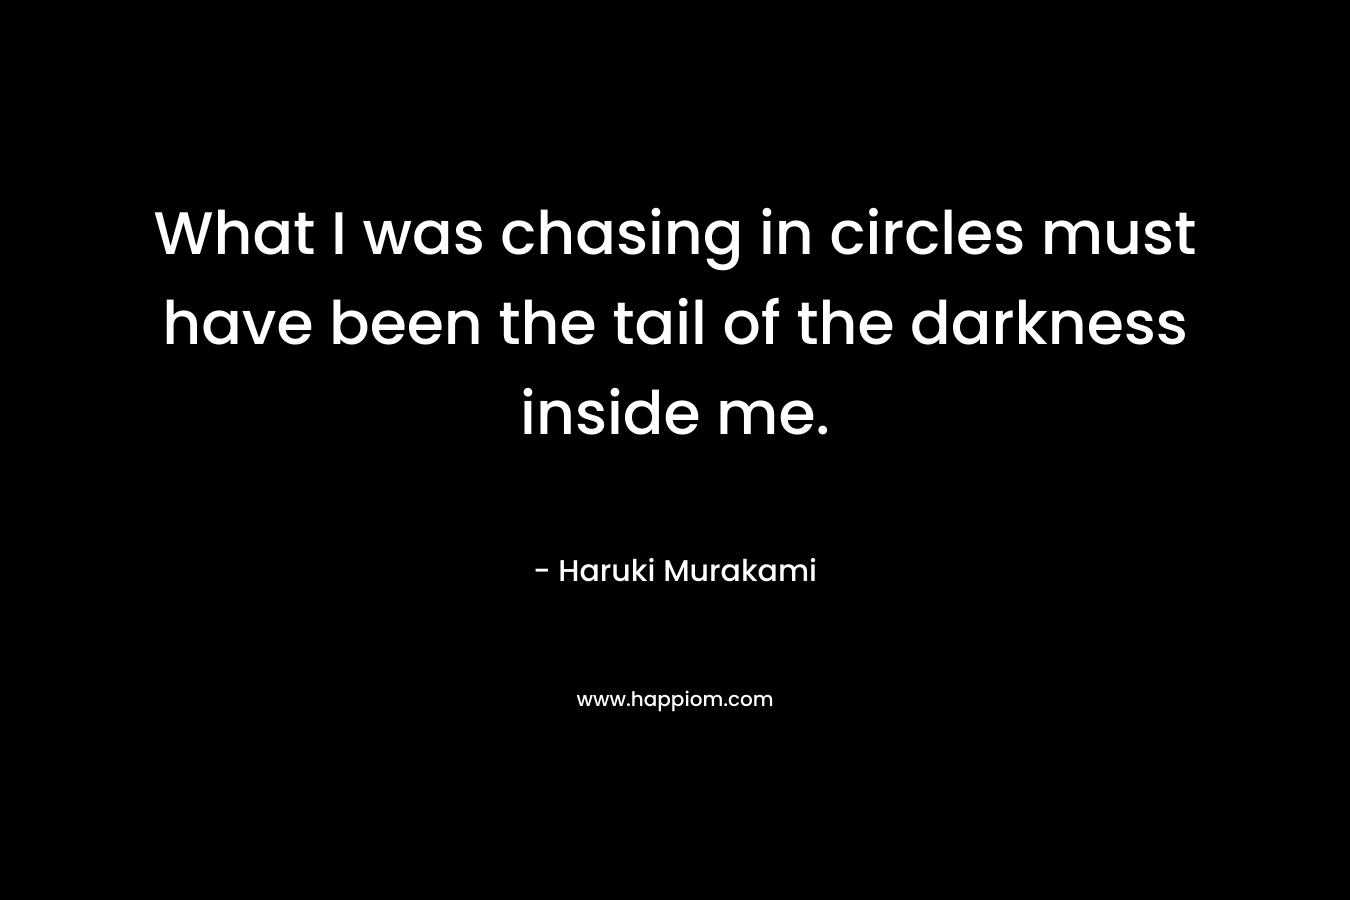 What I was chasing in circles must have been the tail of the darkness inside me.